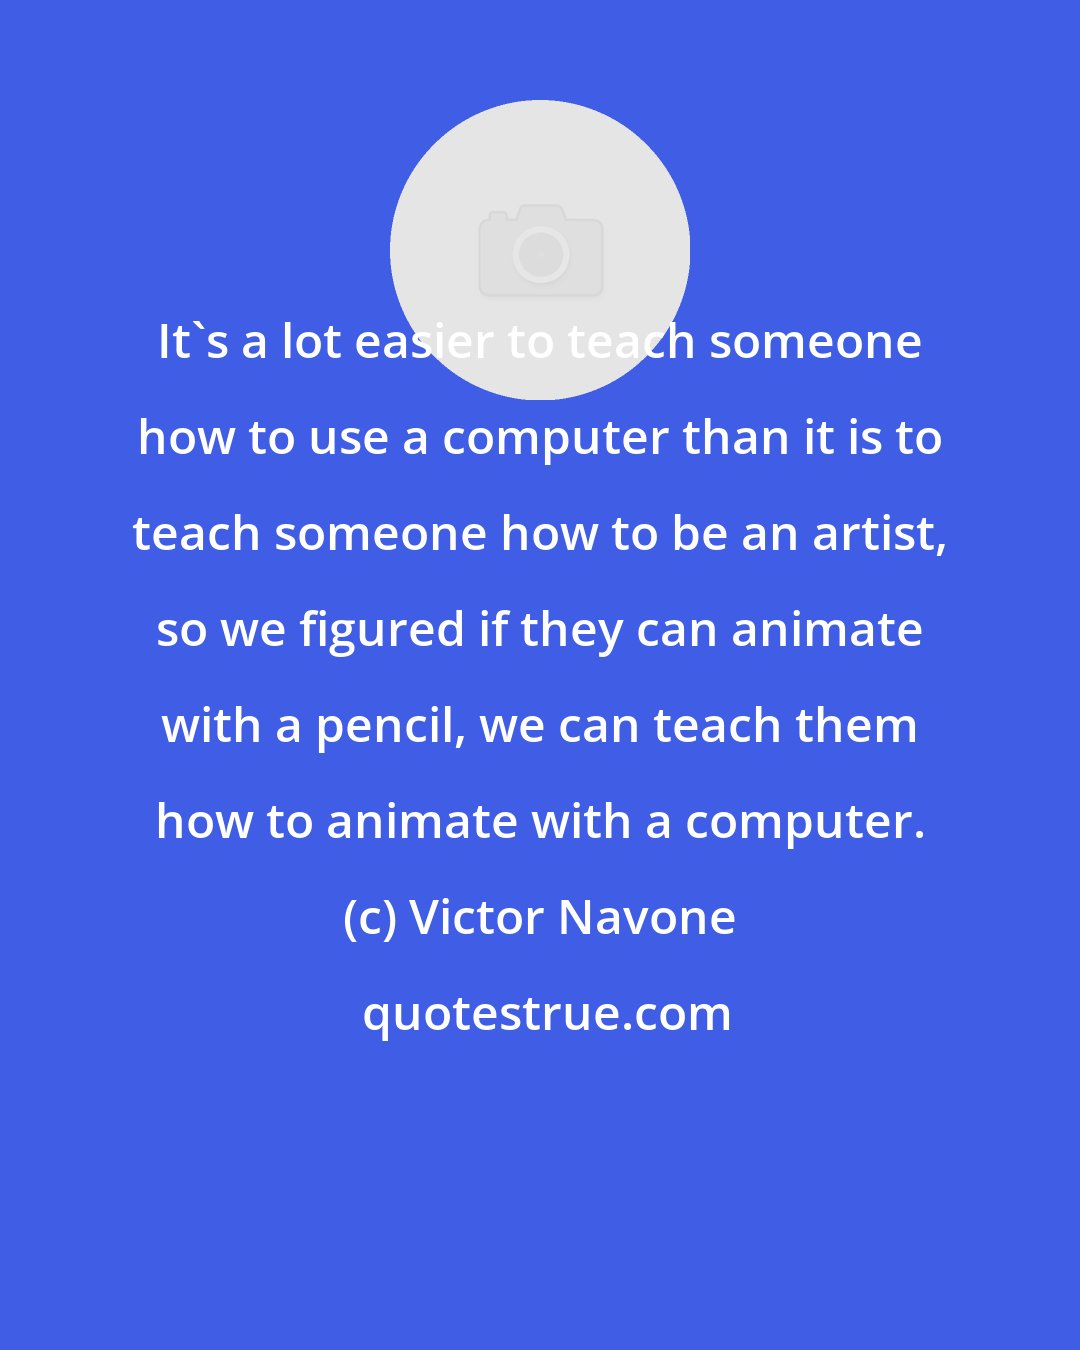 Victor Navone: It's a lot easier to teach someone how to use a computer than it is to teach someone how to be an artist, so we figured if they can animate with a pencil, we can teach them how to animate with a computer.